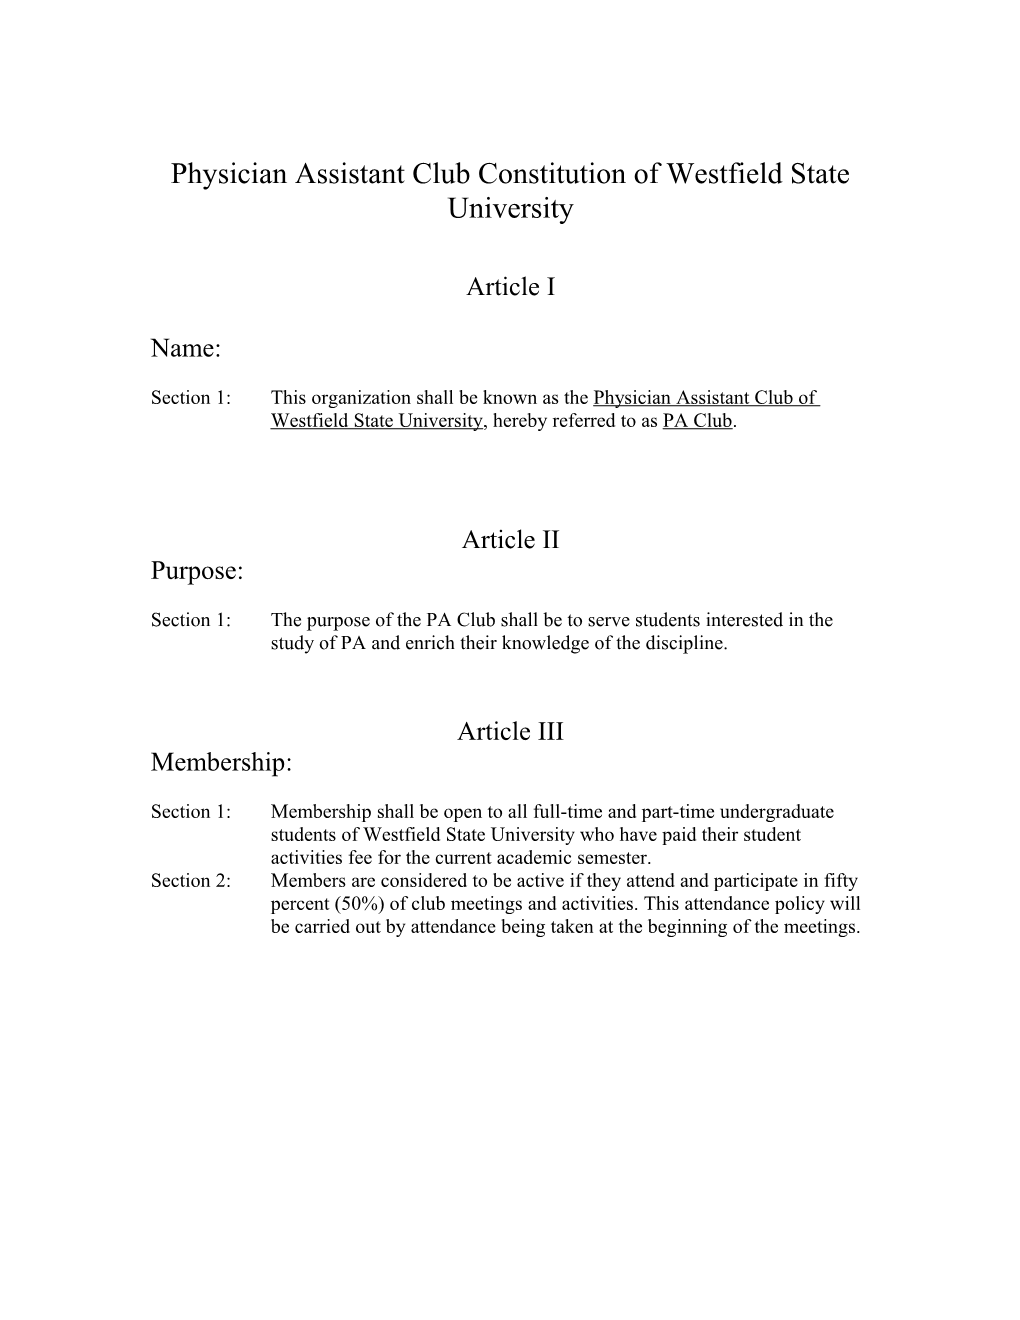 Physician Assistant Club Constitution of Westfield State University